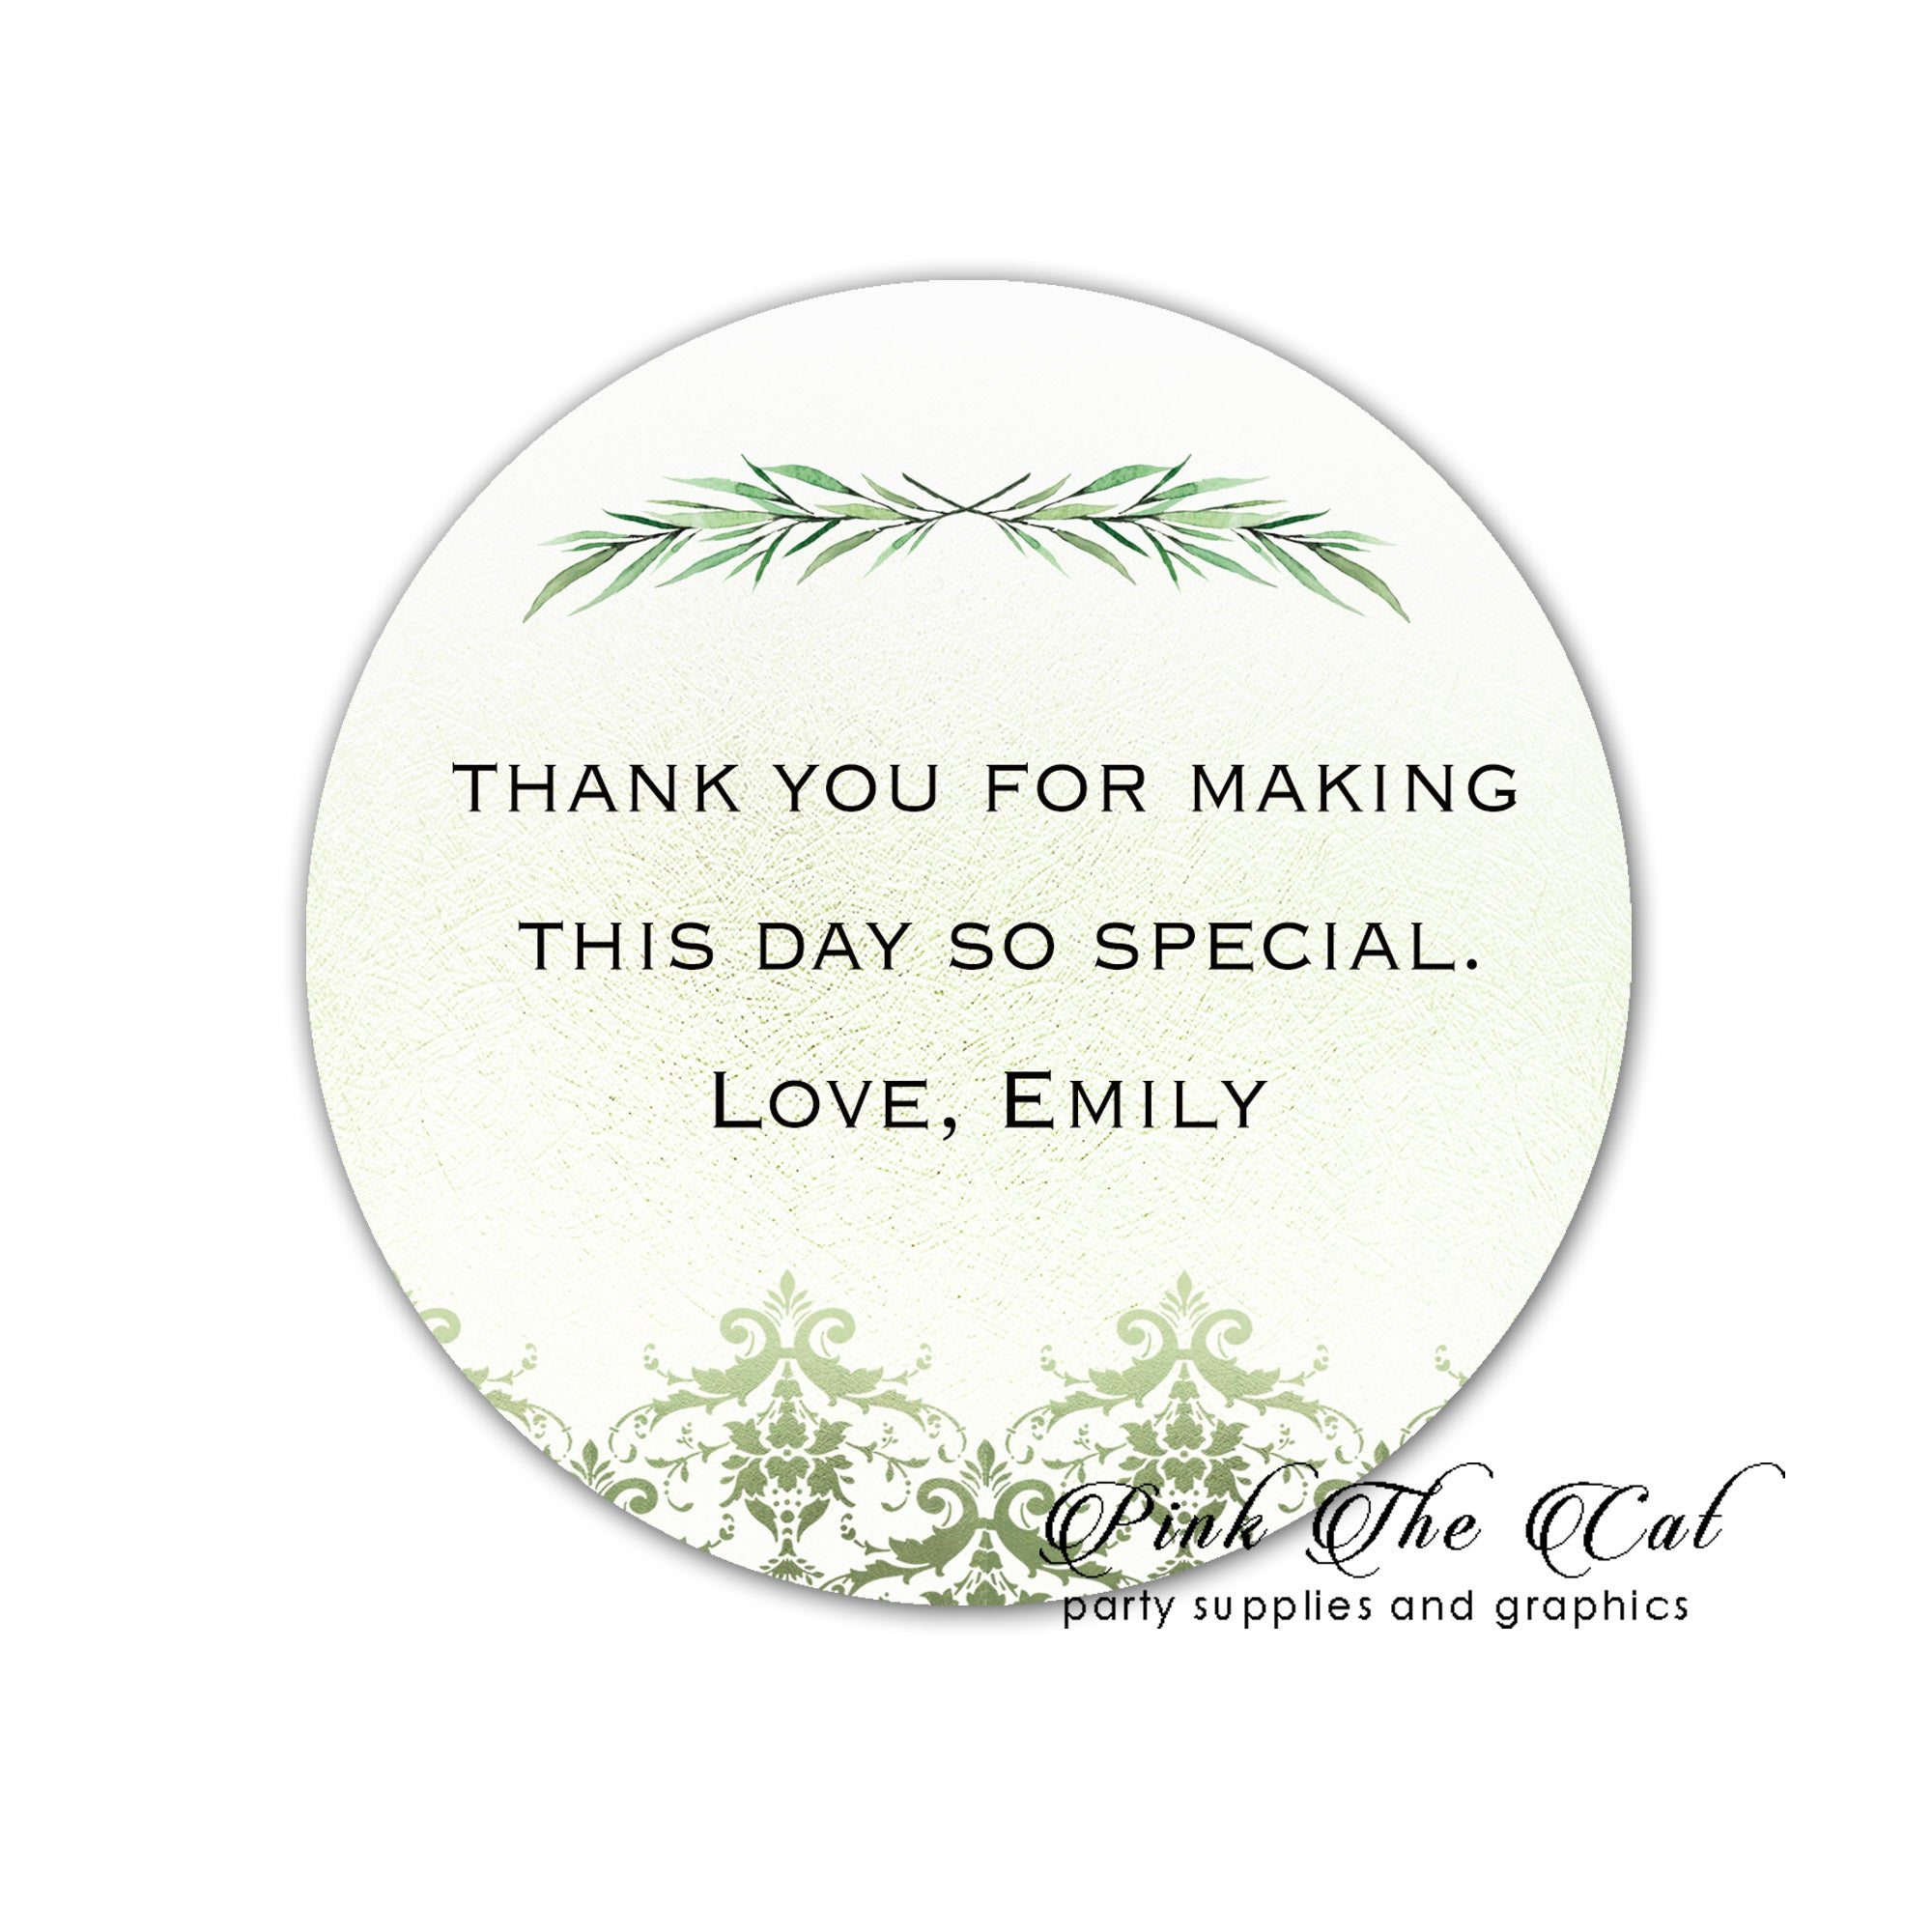 70 Greenery stickers watercolor brunch wedding birthday party